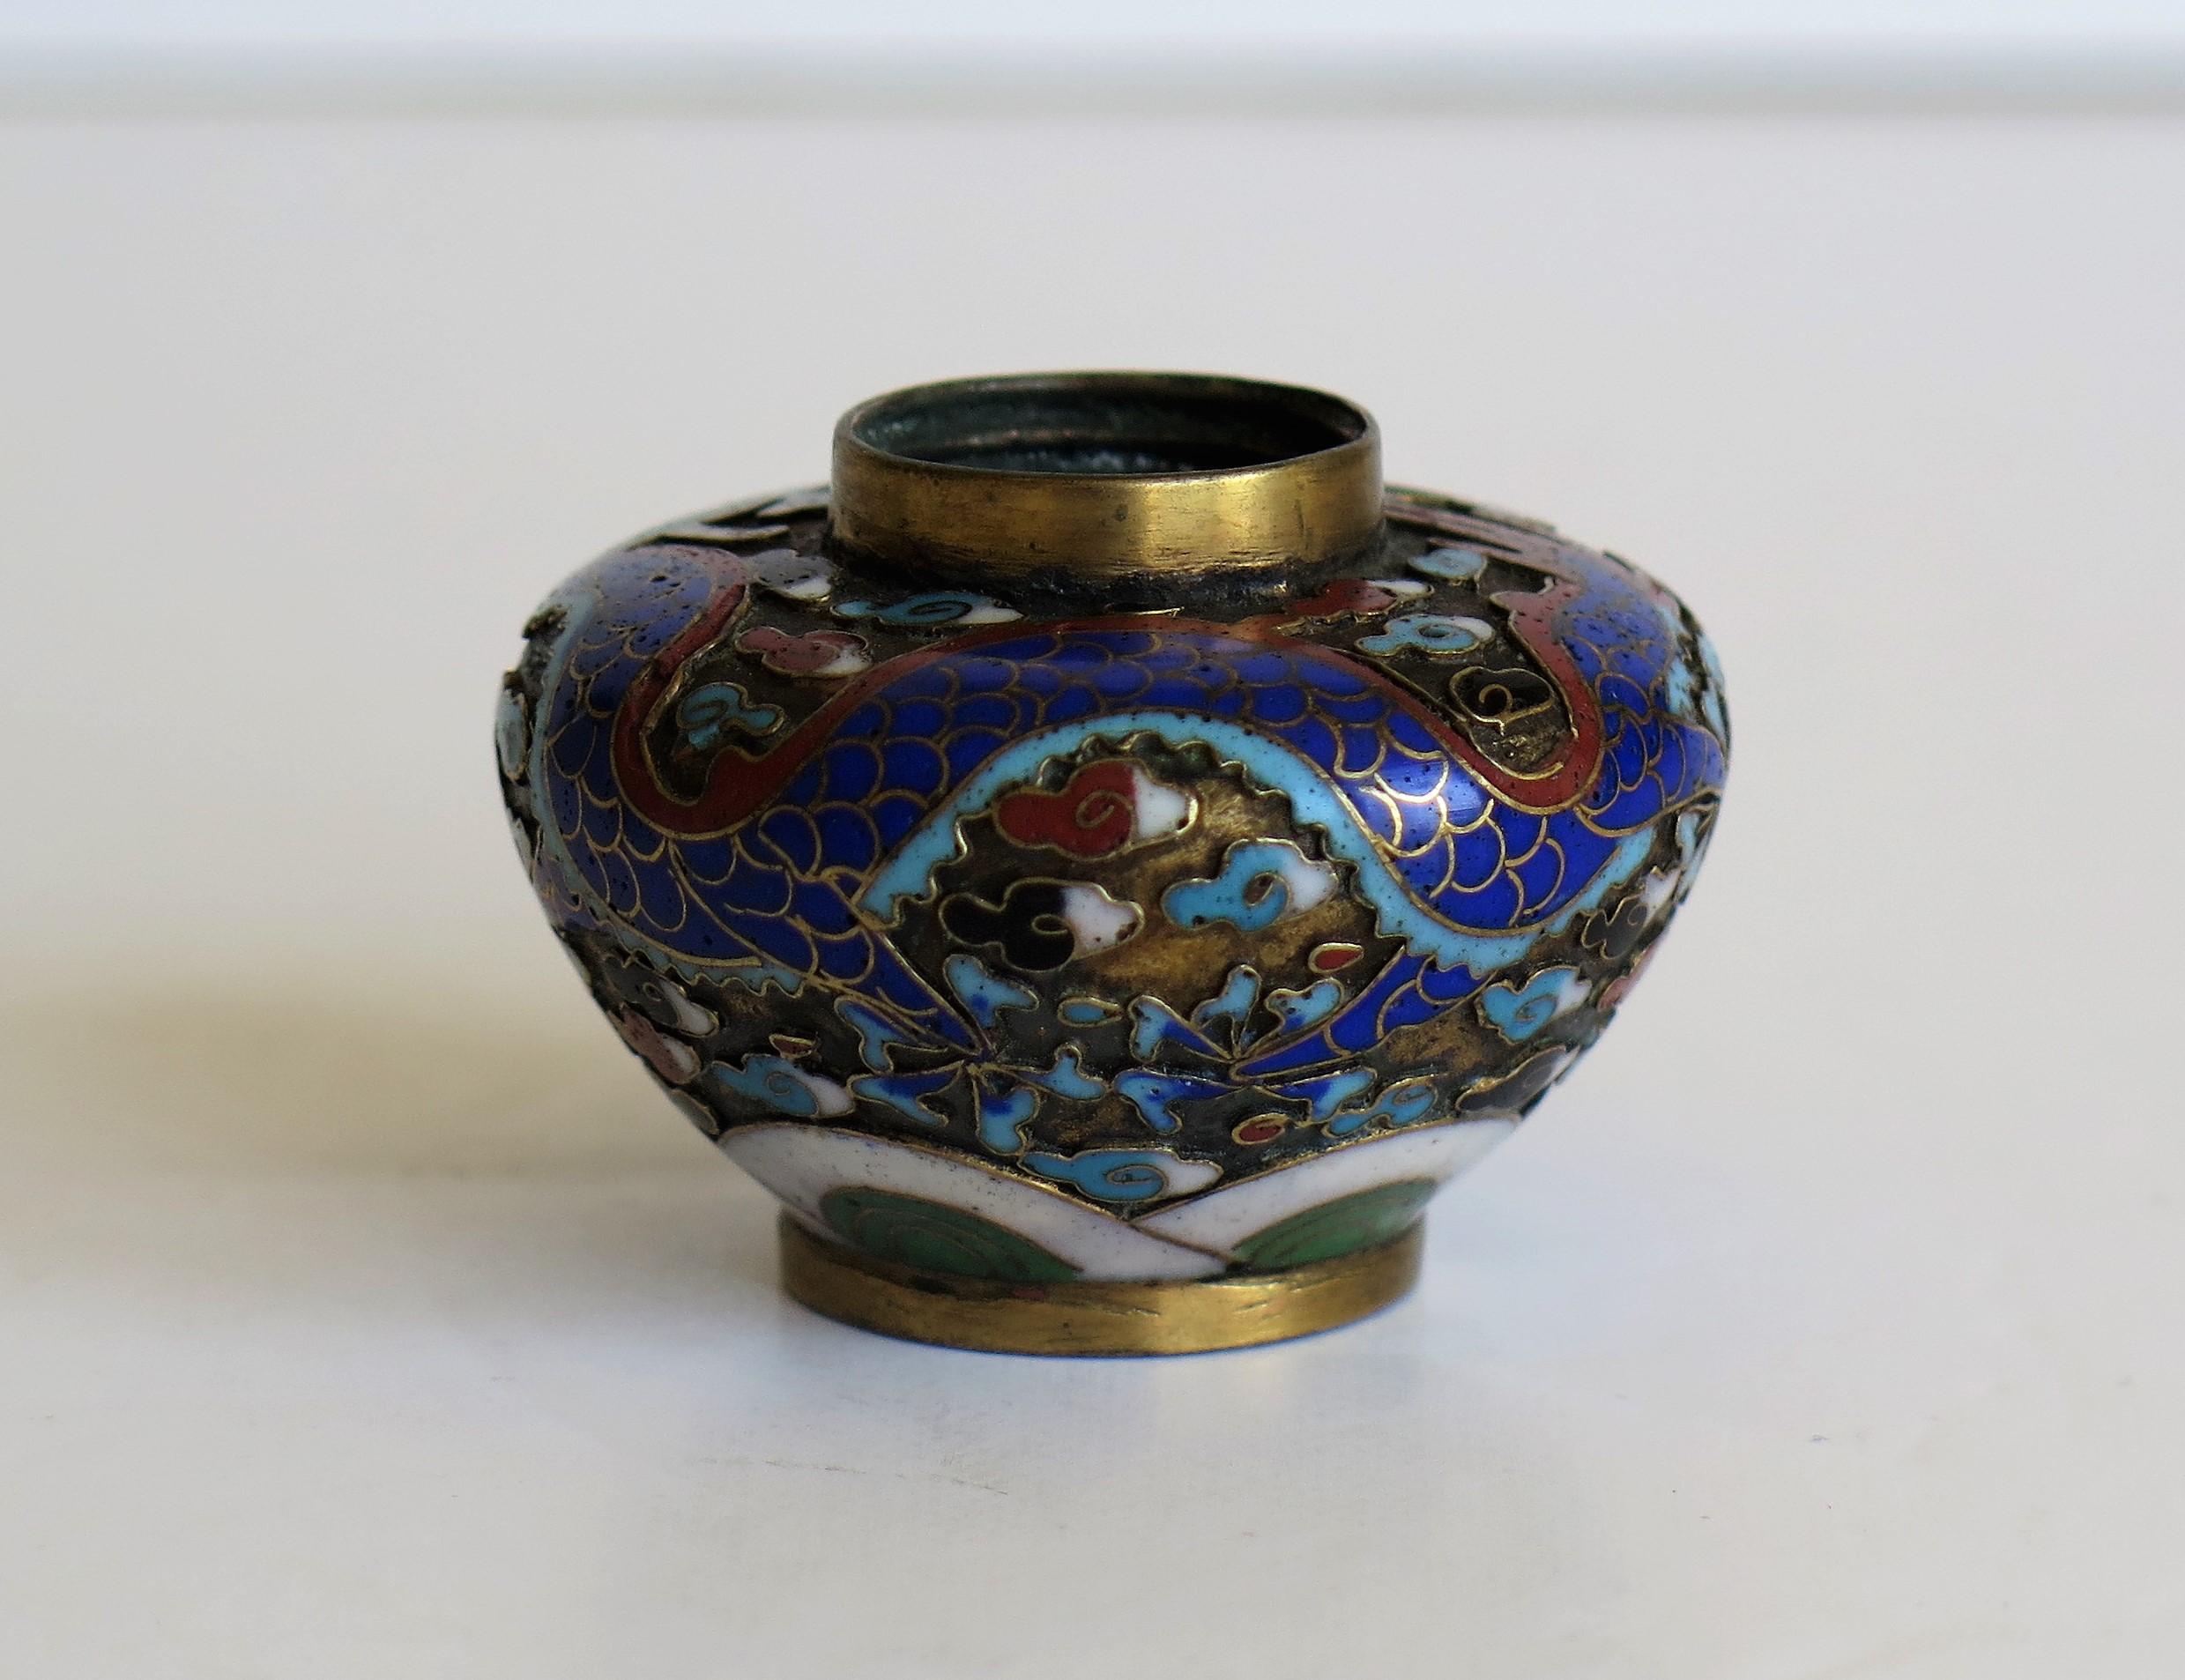 19th Century Chinese Cloisonné Pepper Pot with Dragon Decoration, Qing Dynasty 9